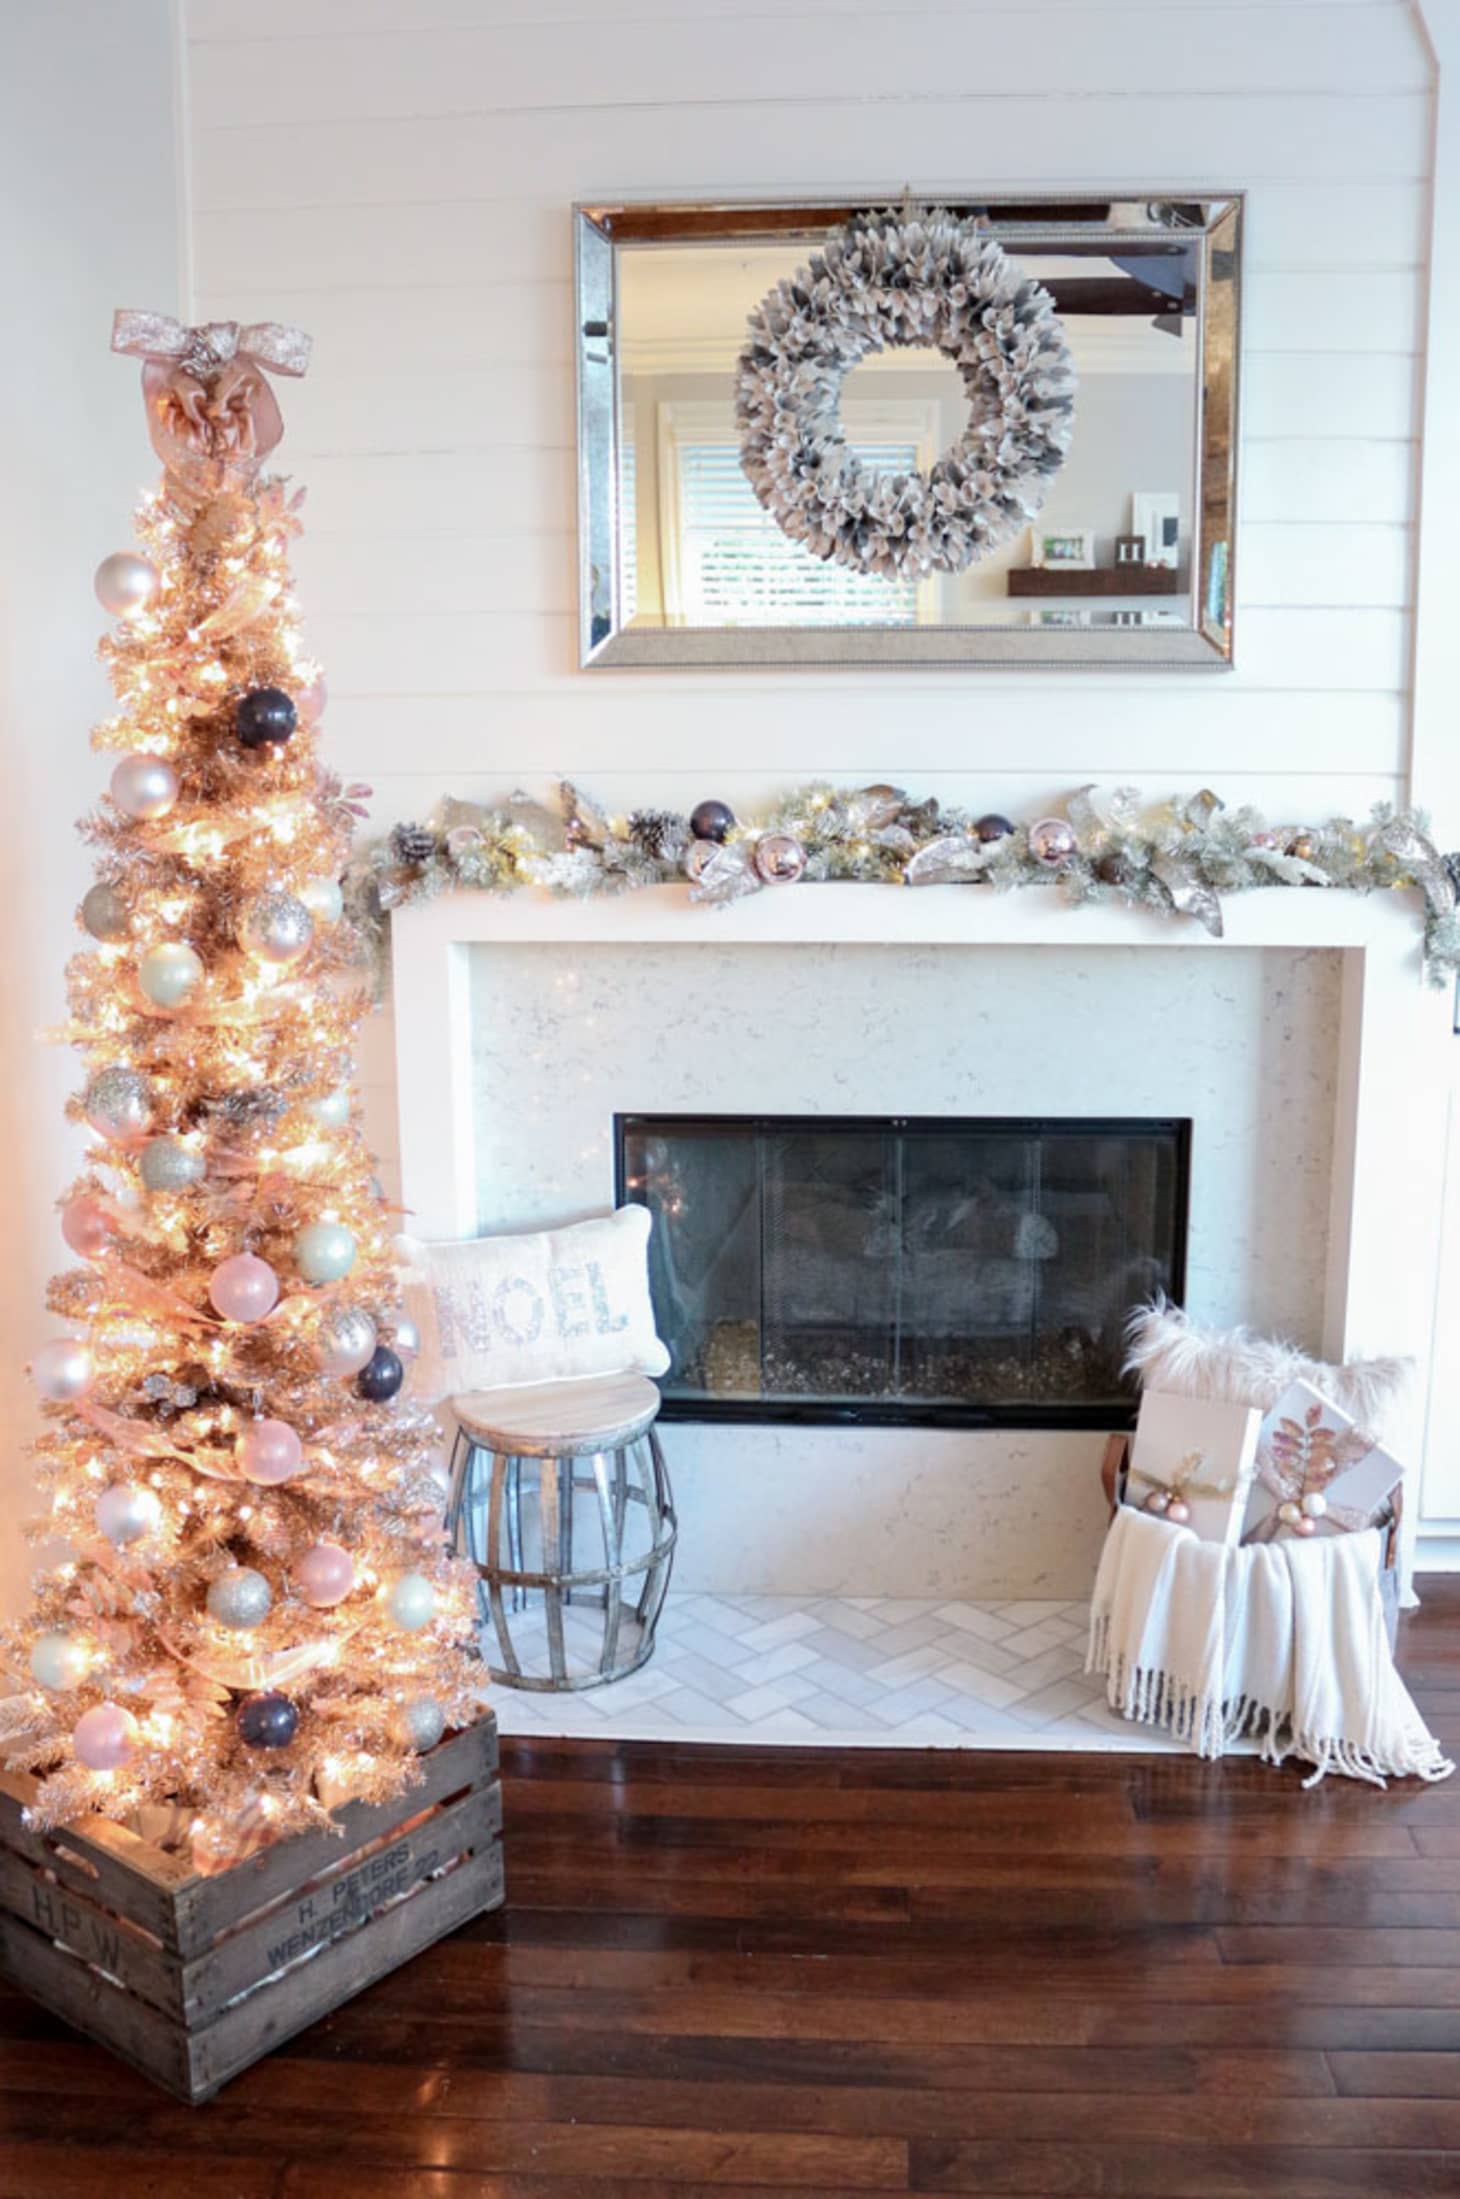 Rose Gold Christmas Tree Trend Where To Buy Apartment Therapy